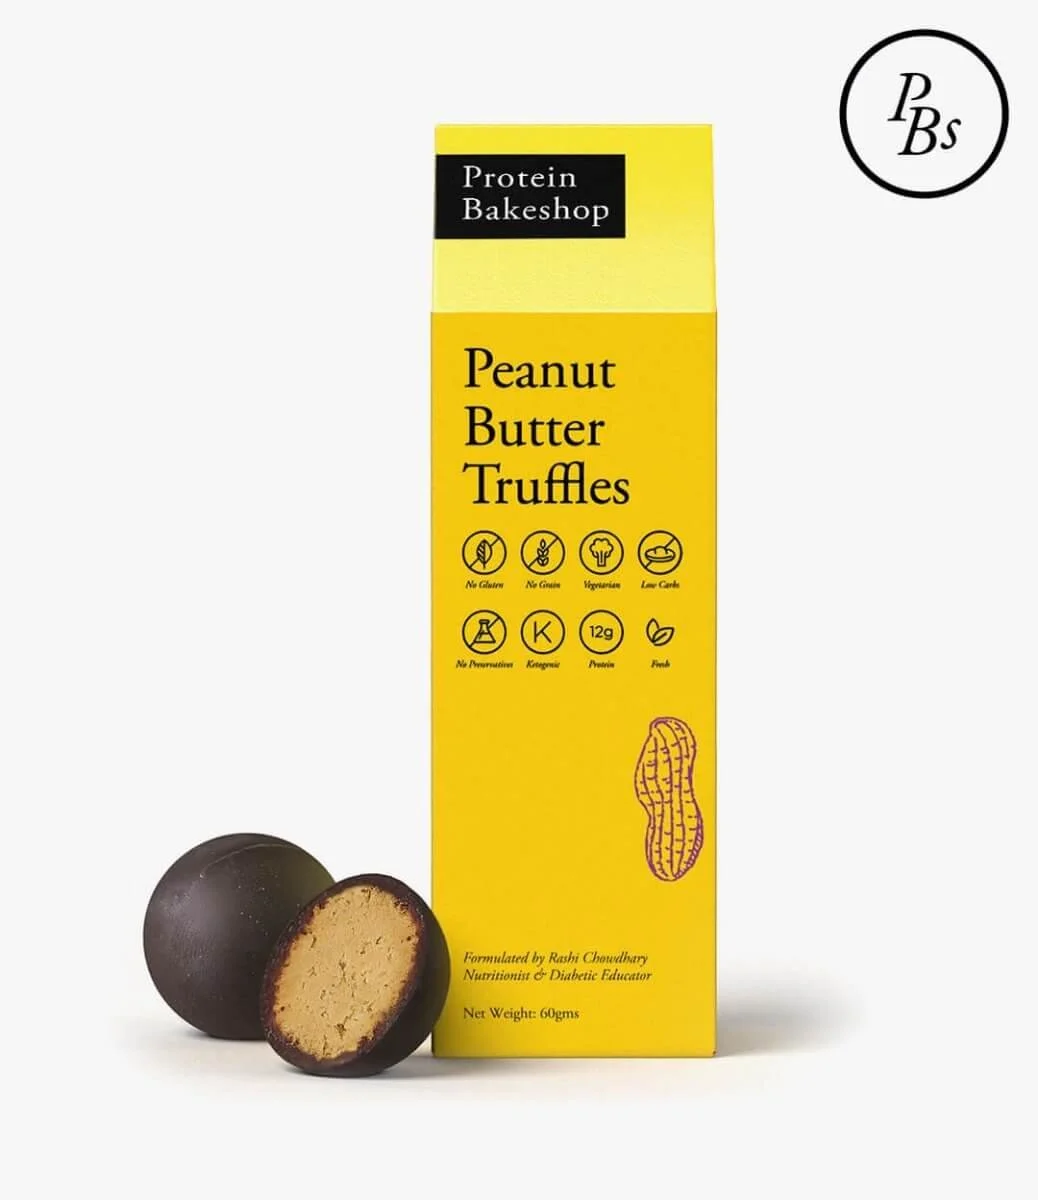 Peanut Butter Truffles by Protein Bakeshop - Set of 3 Boxes